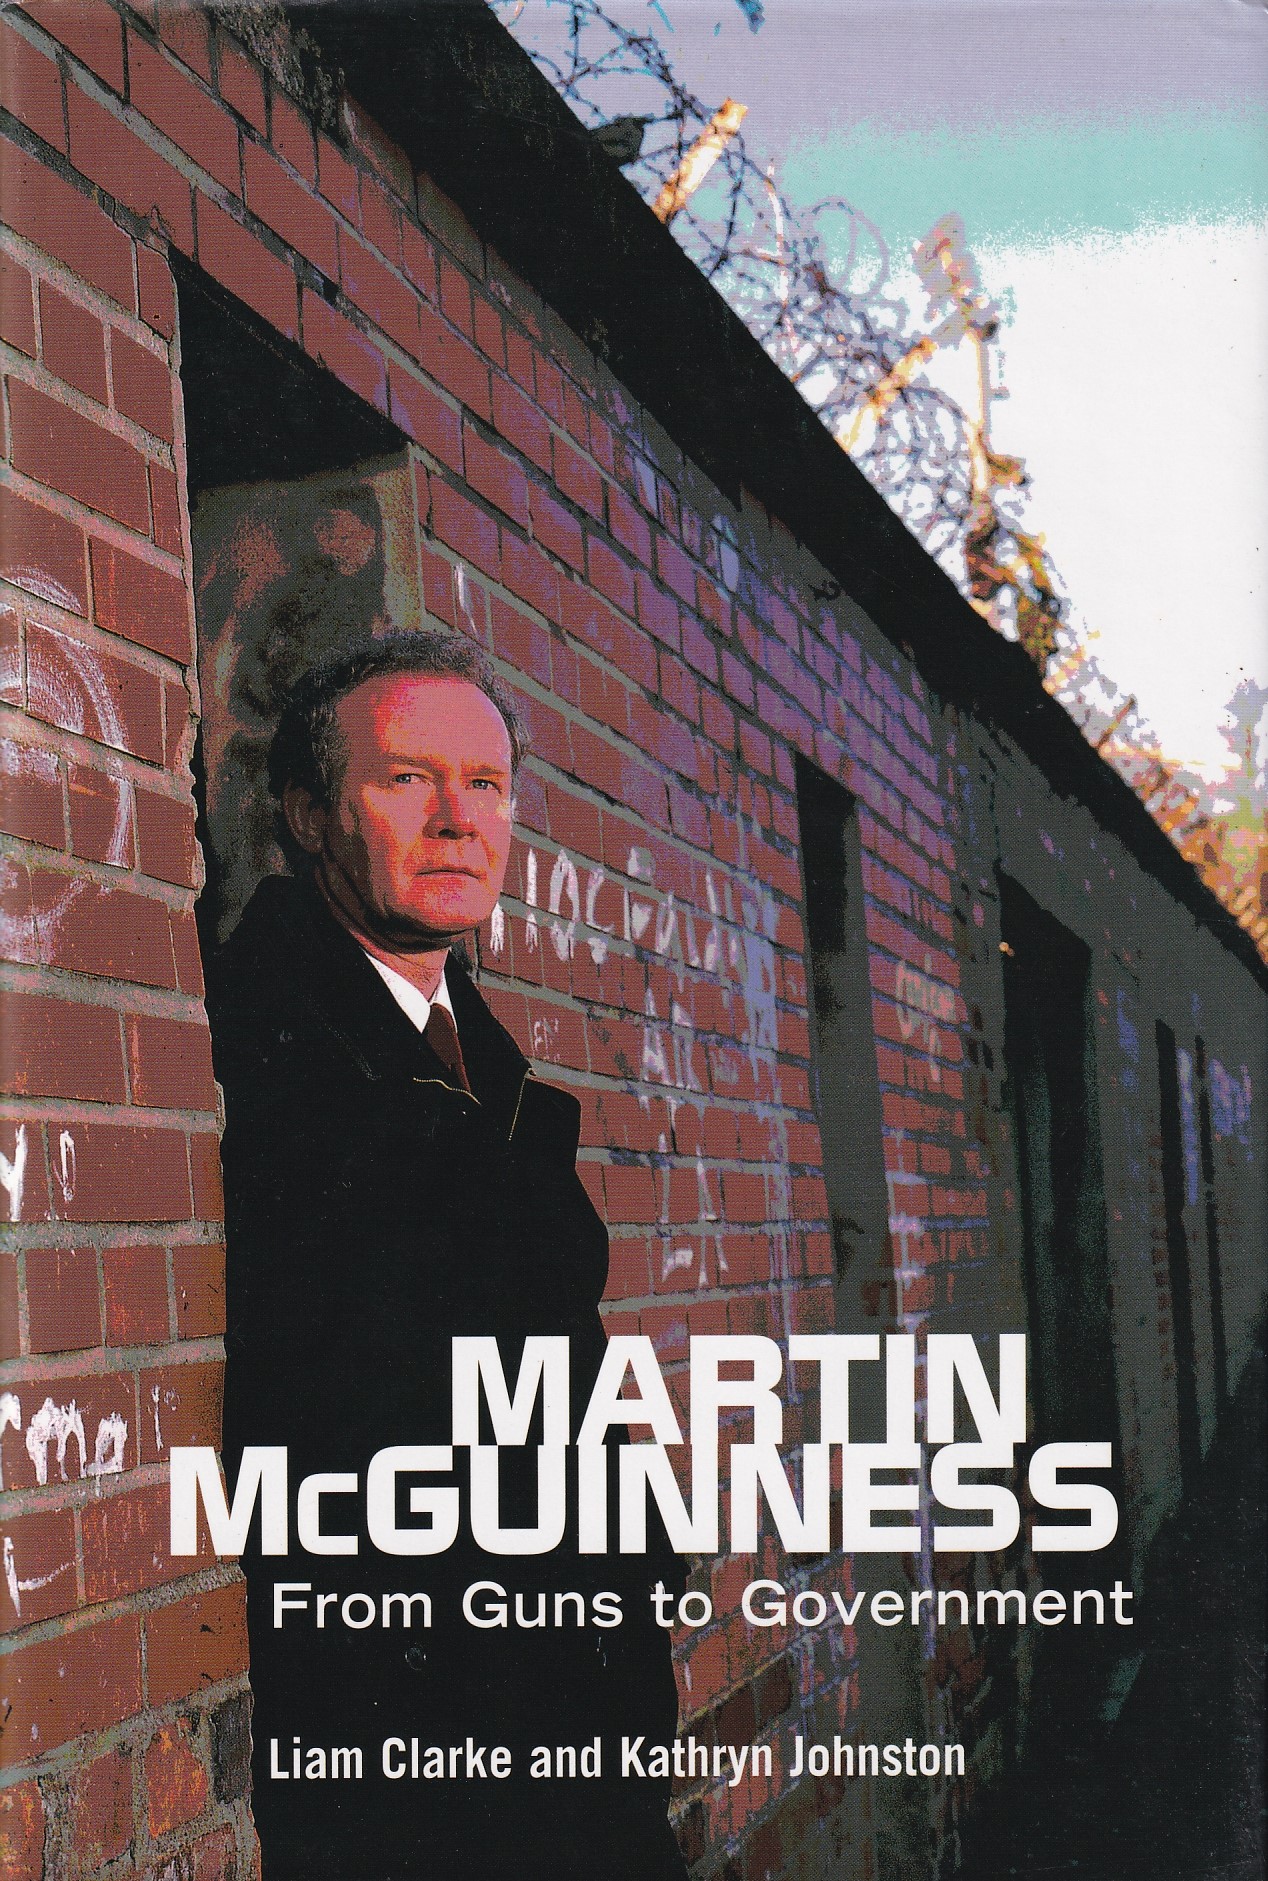 Martin McGuinness: From Guns to Government | Liam Clarke and Kathryn Johnston | Charlie Byrne's